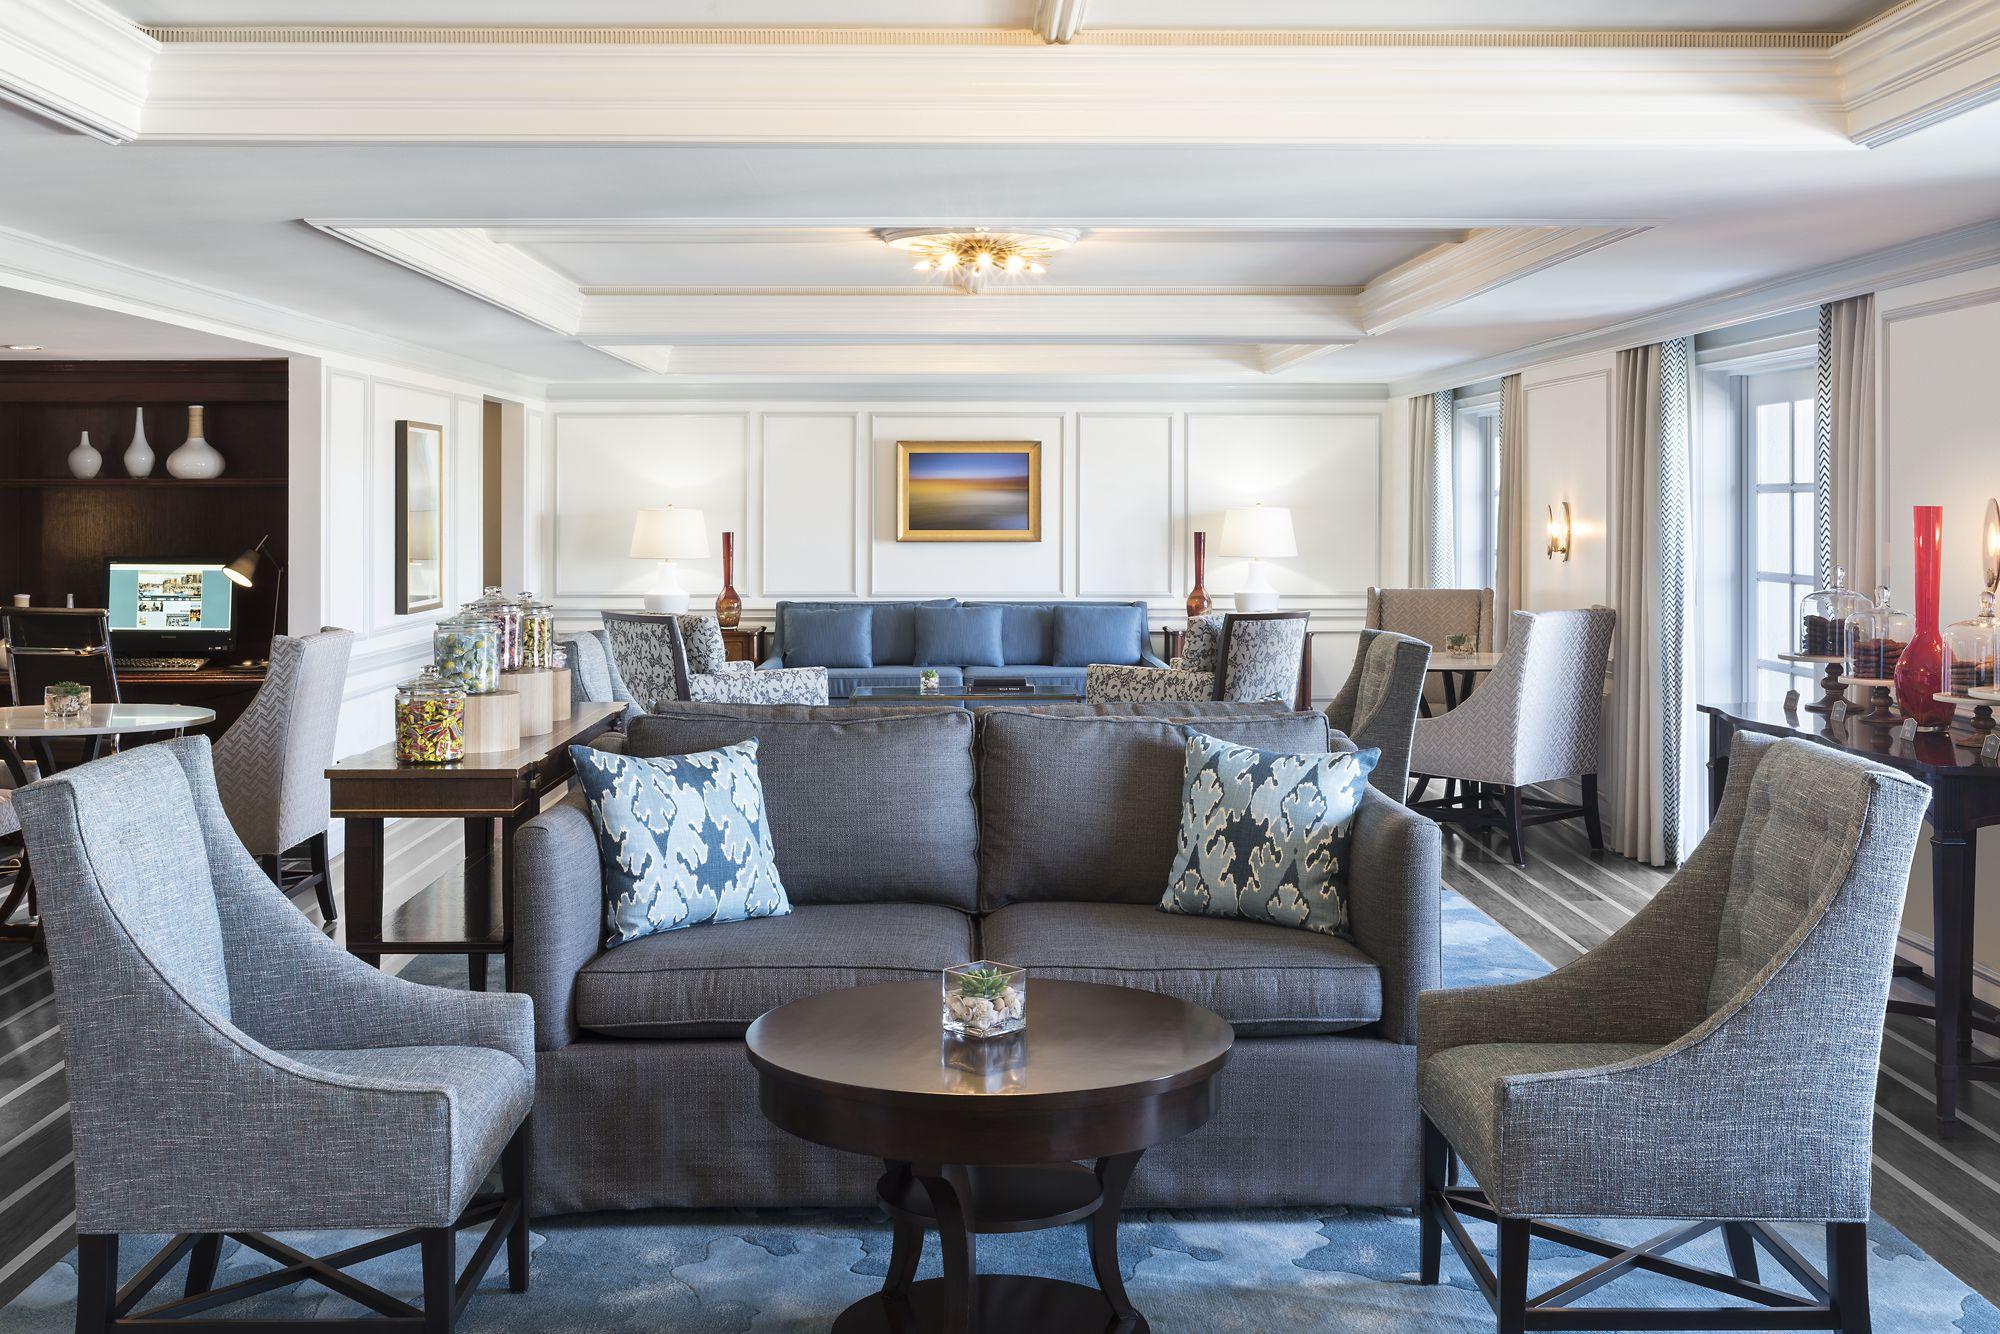 The 5 Best Hotel Executive Club Lounges in Los Angeles